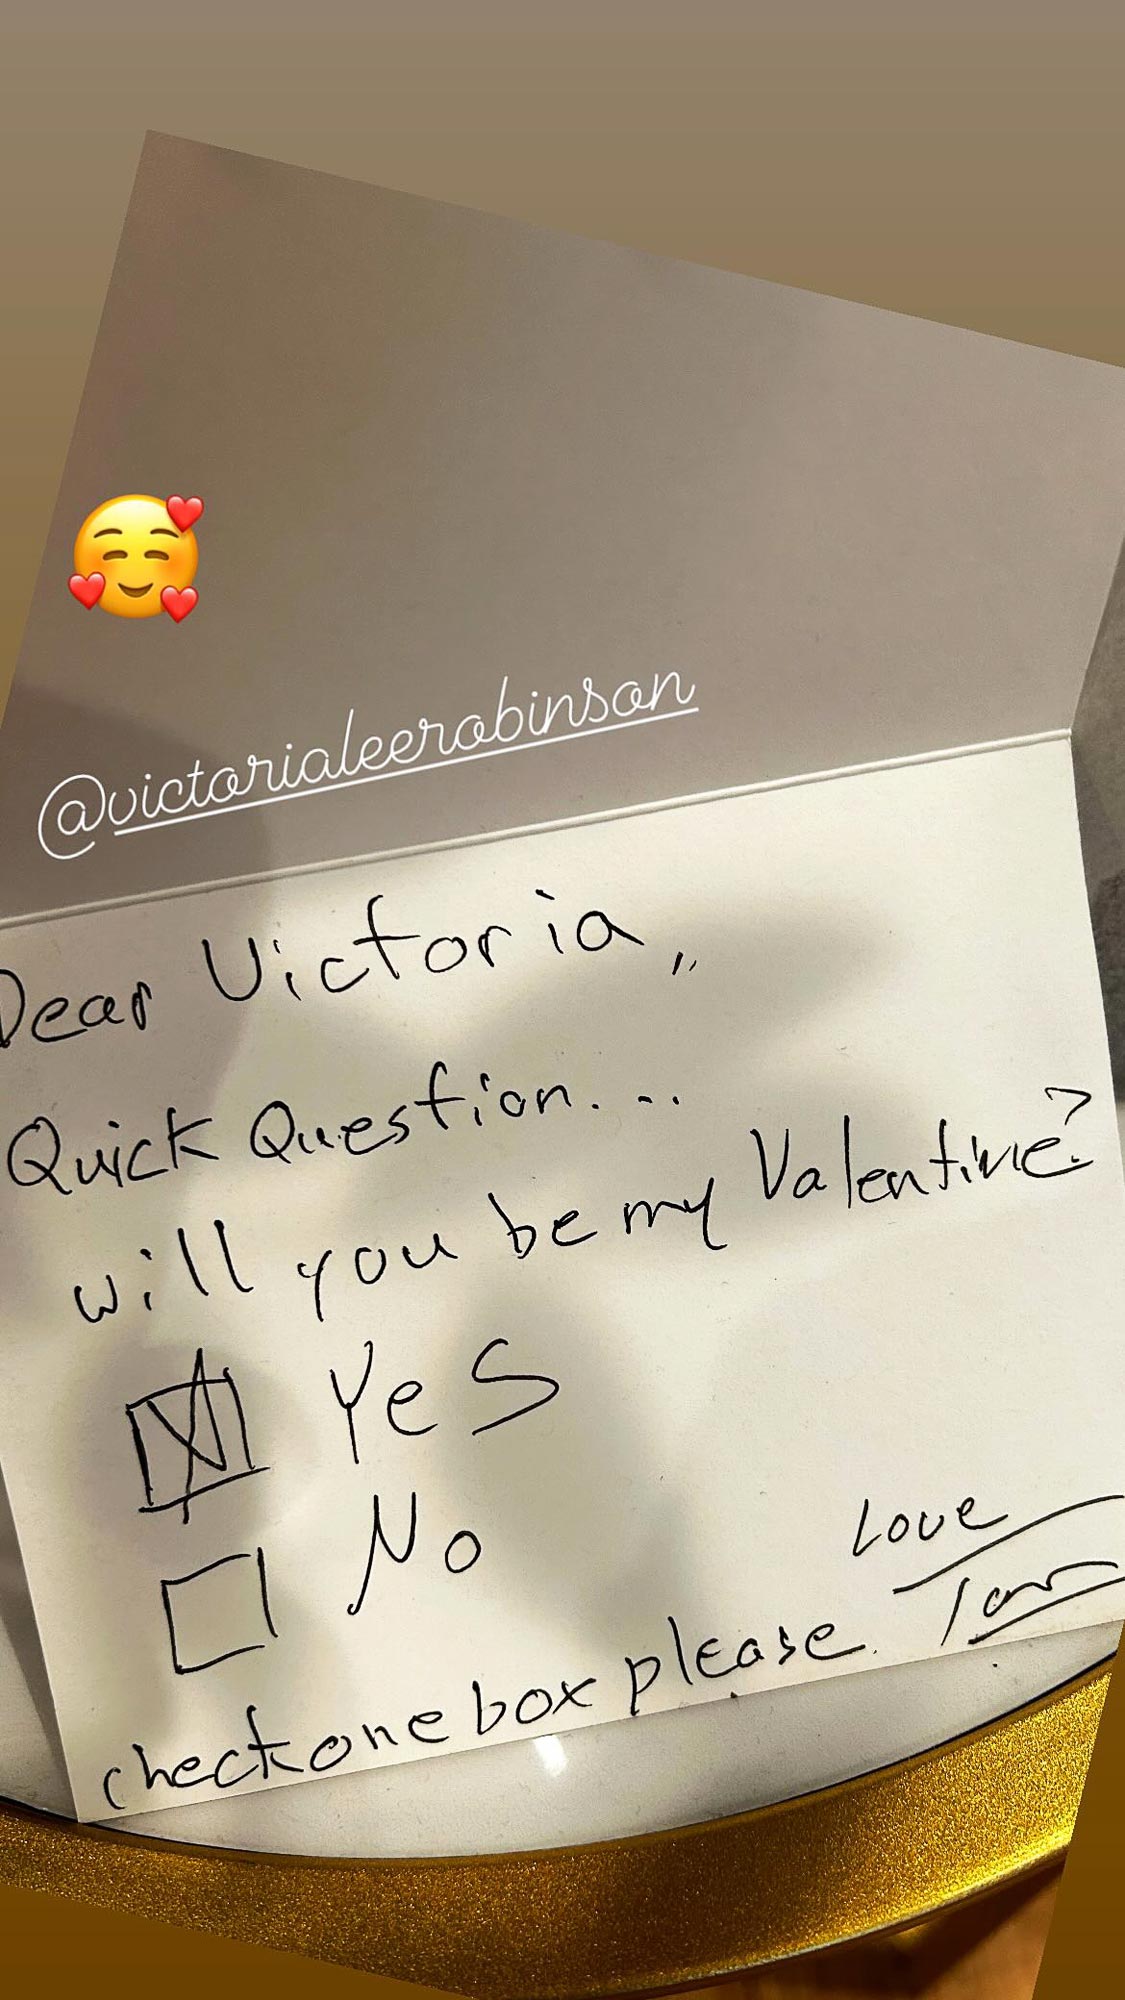 Tom Sandoval Goes Old School Asks Victoria Lee Robinson to Be His Valentine With Handwritten Card 320